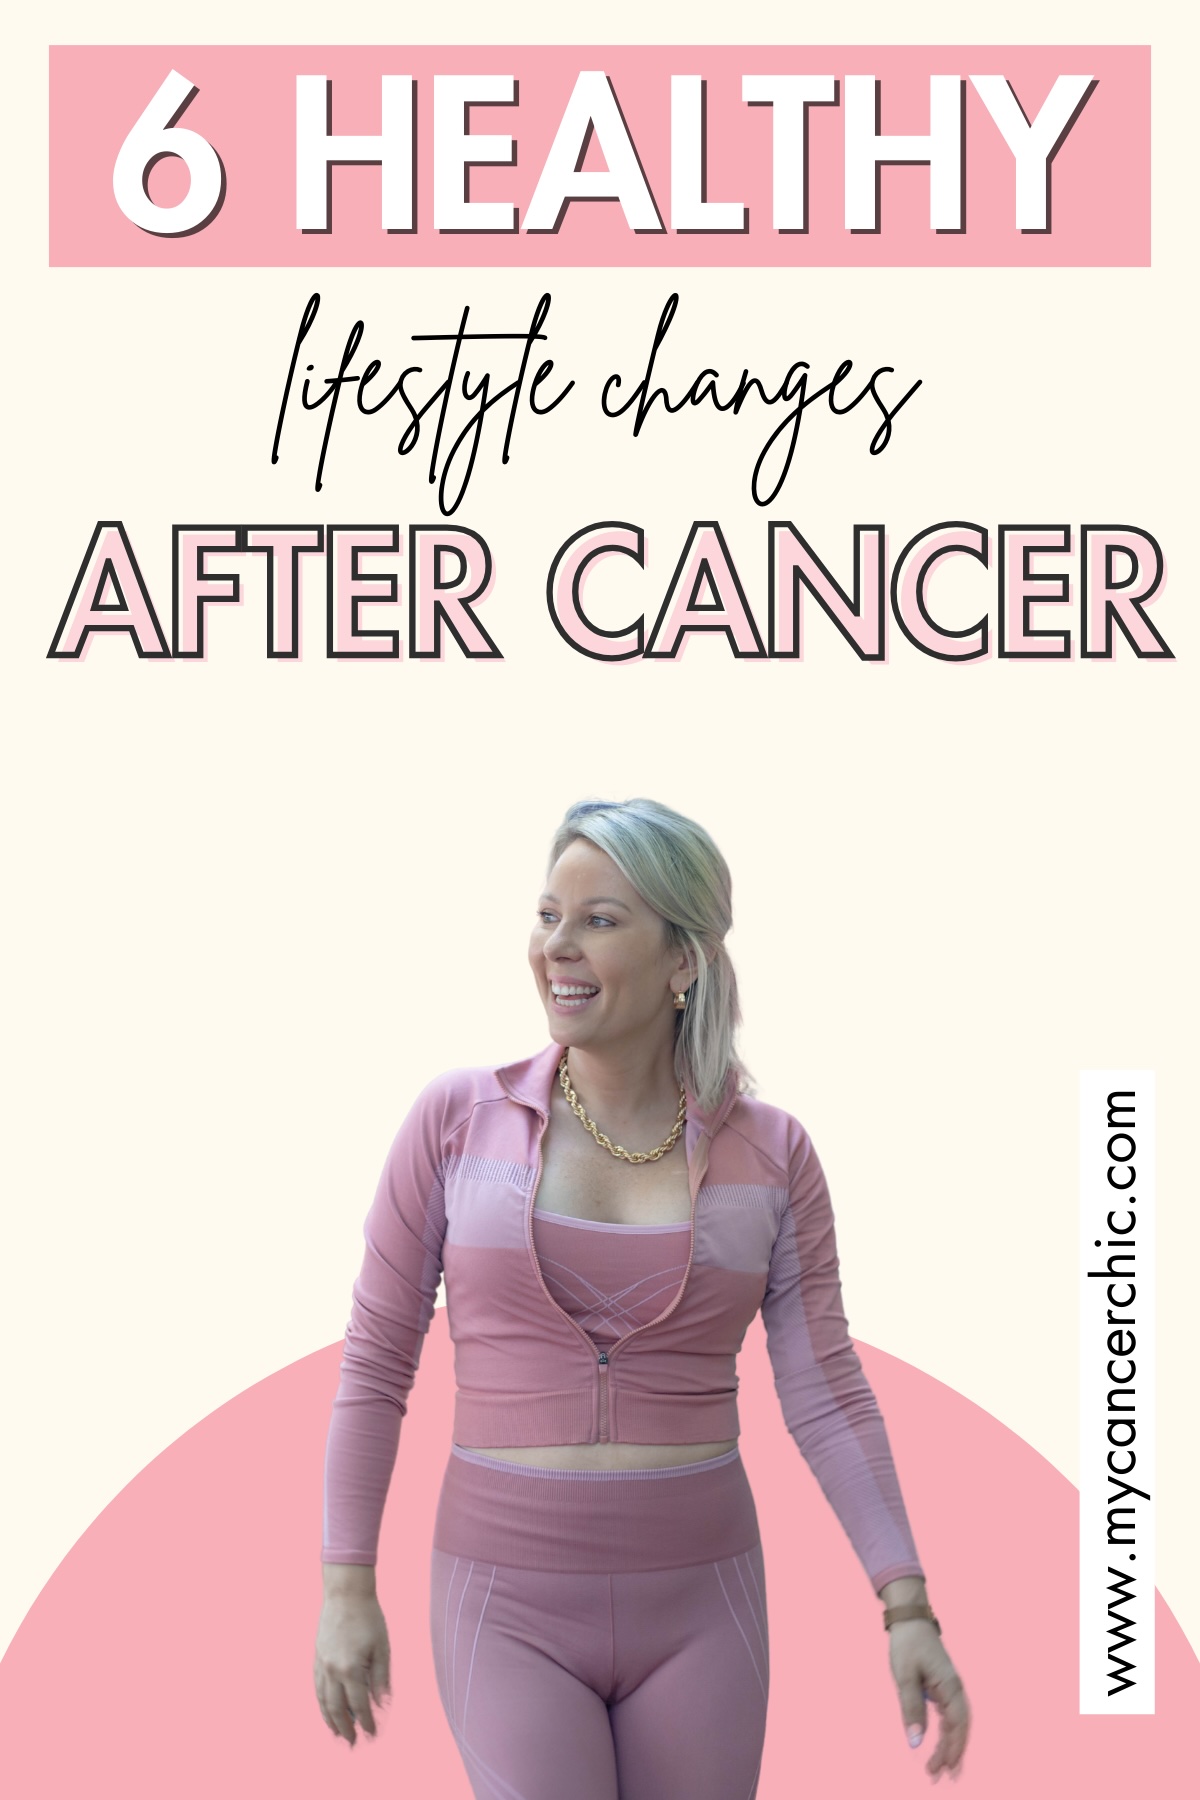 6 Lifestyle Changes After Cancer